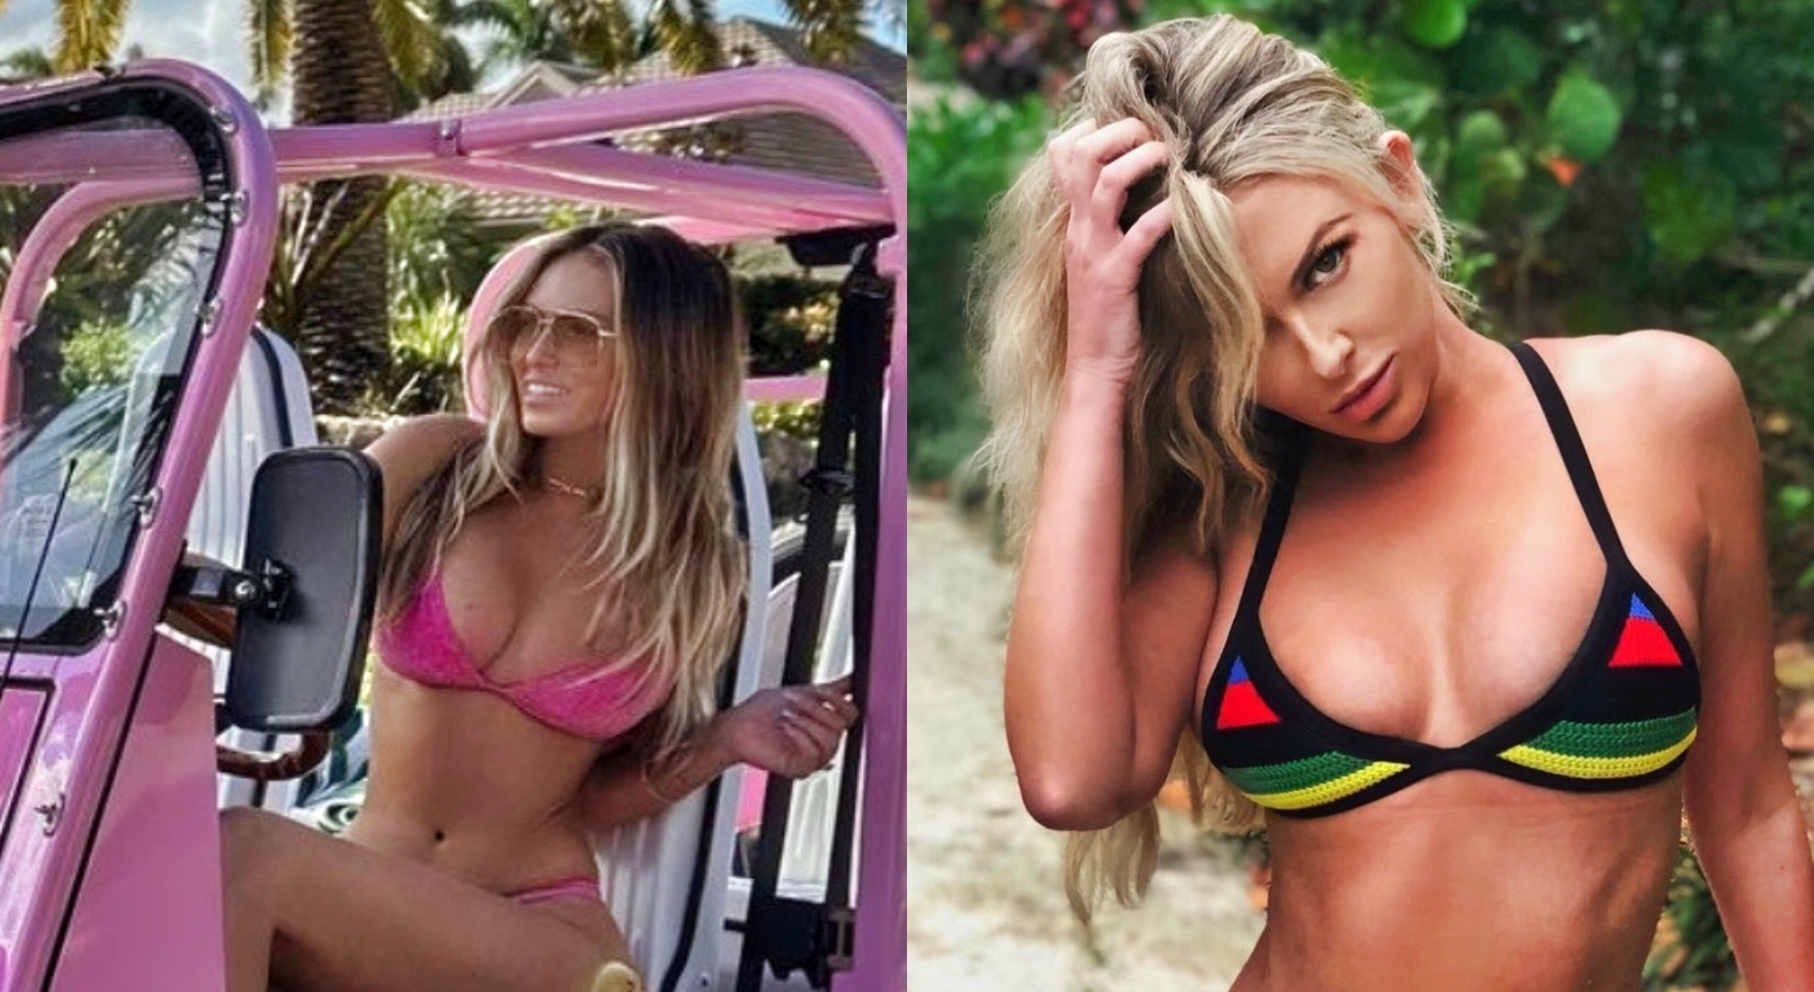 Paulina Gretzky Has Stunning Bikini For A Ride With Her Chicks